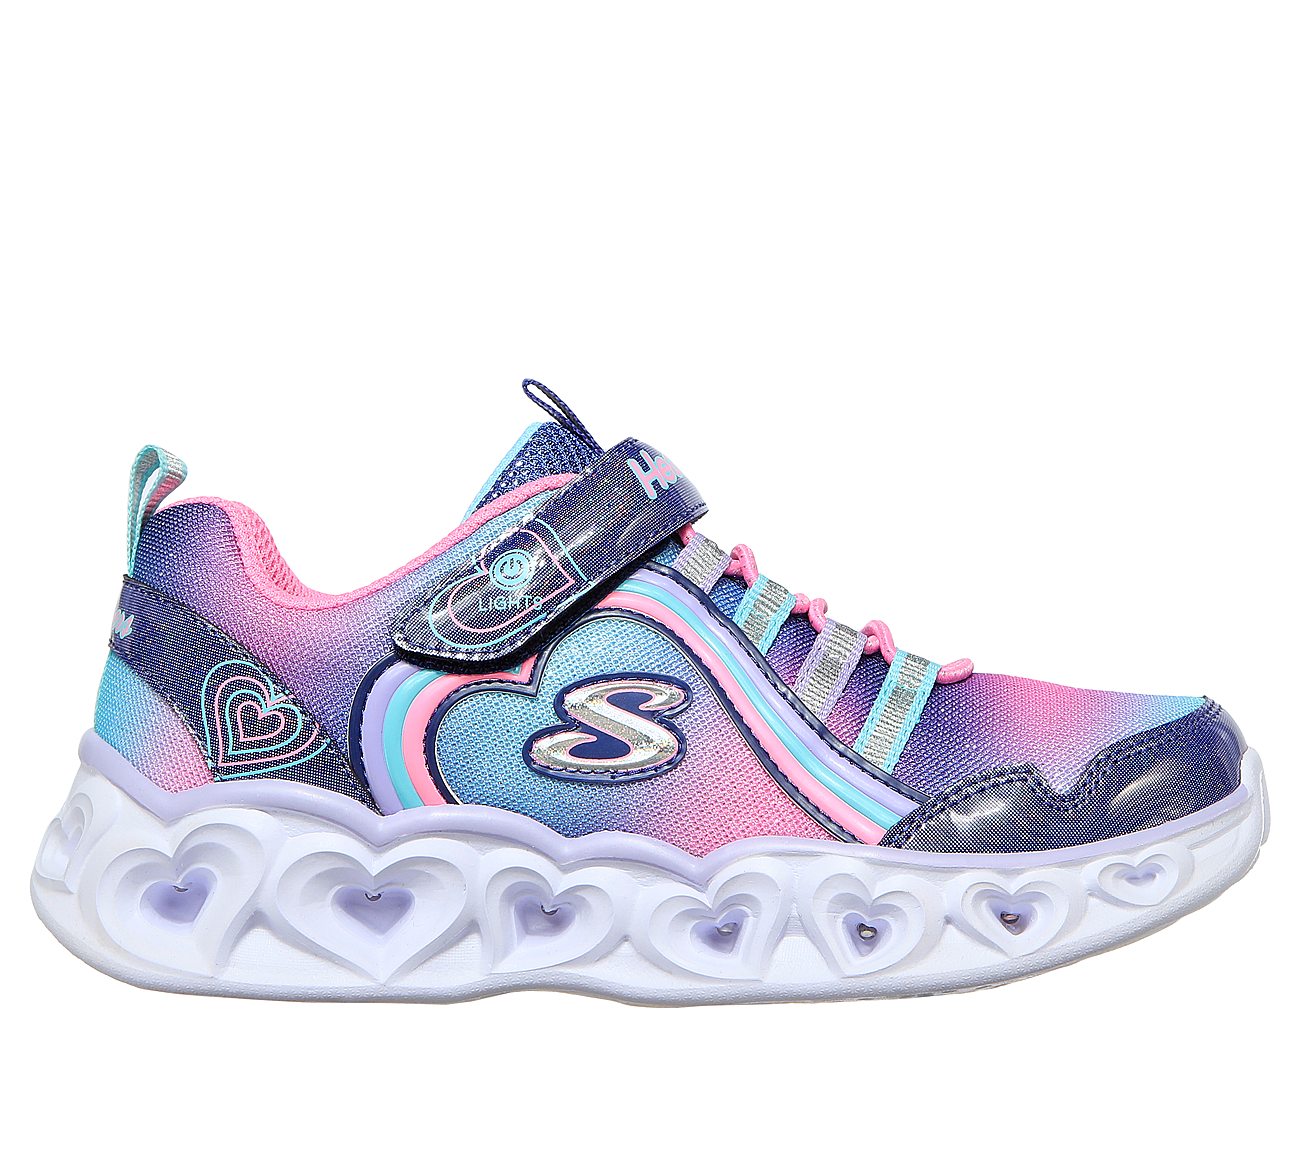 skechers with lights on the bottom